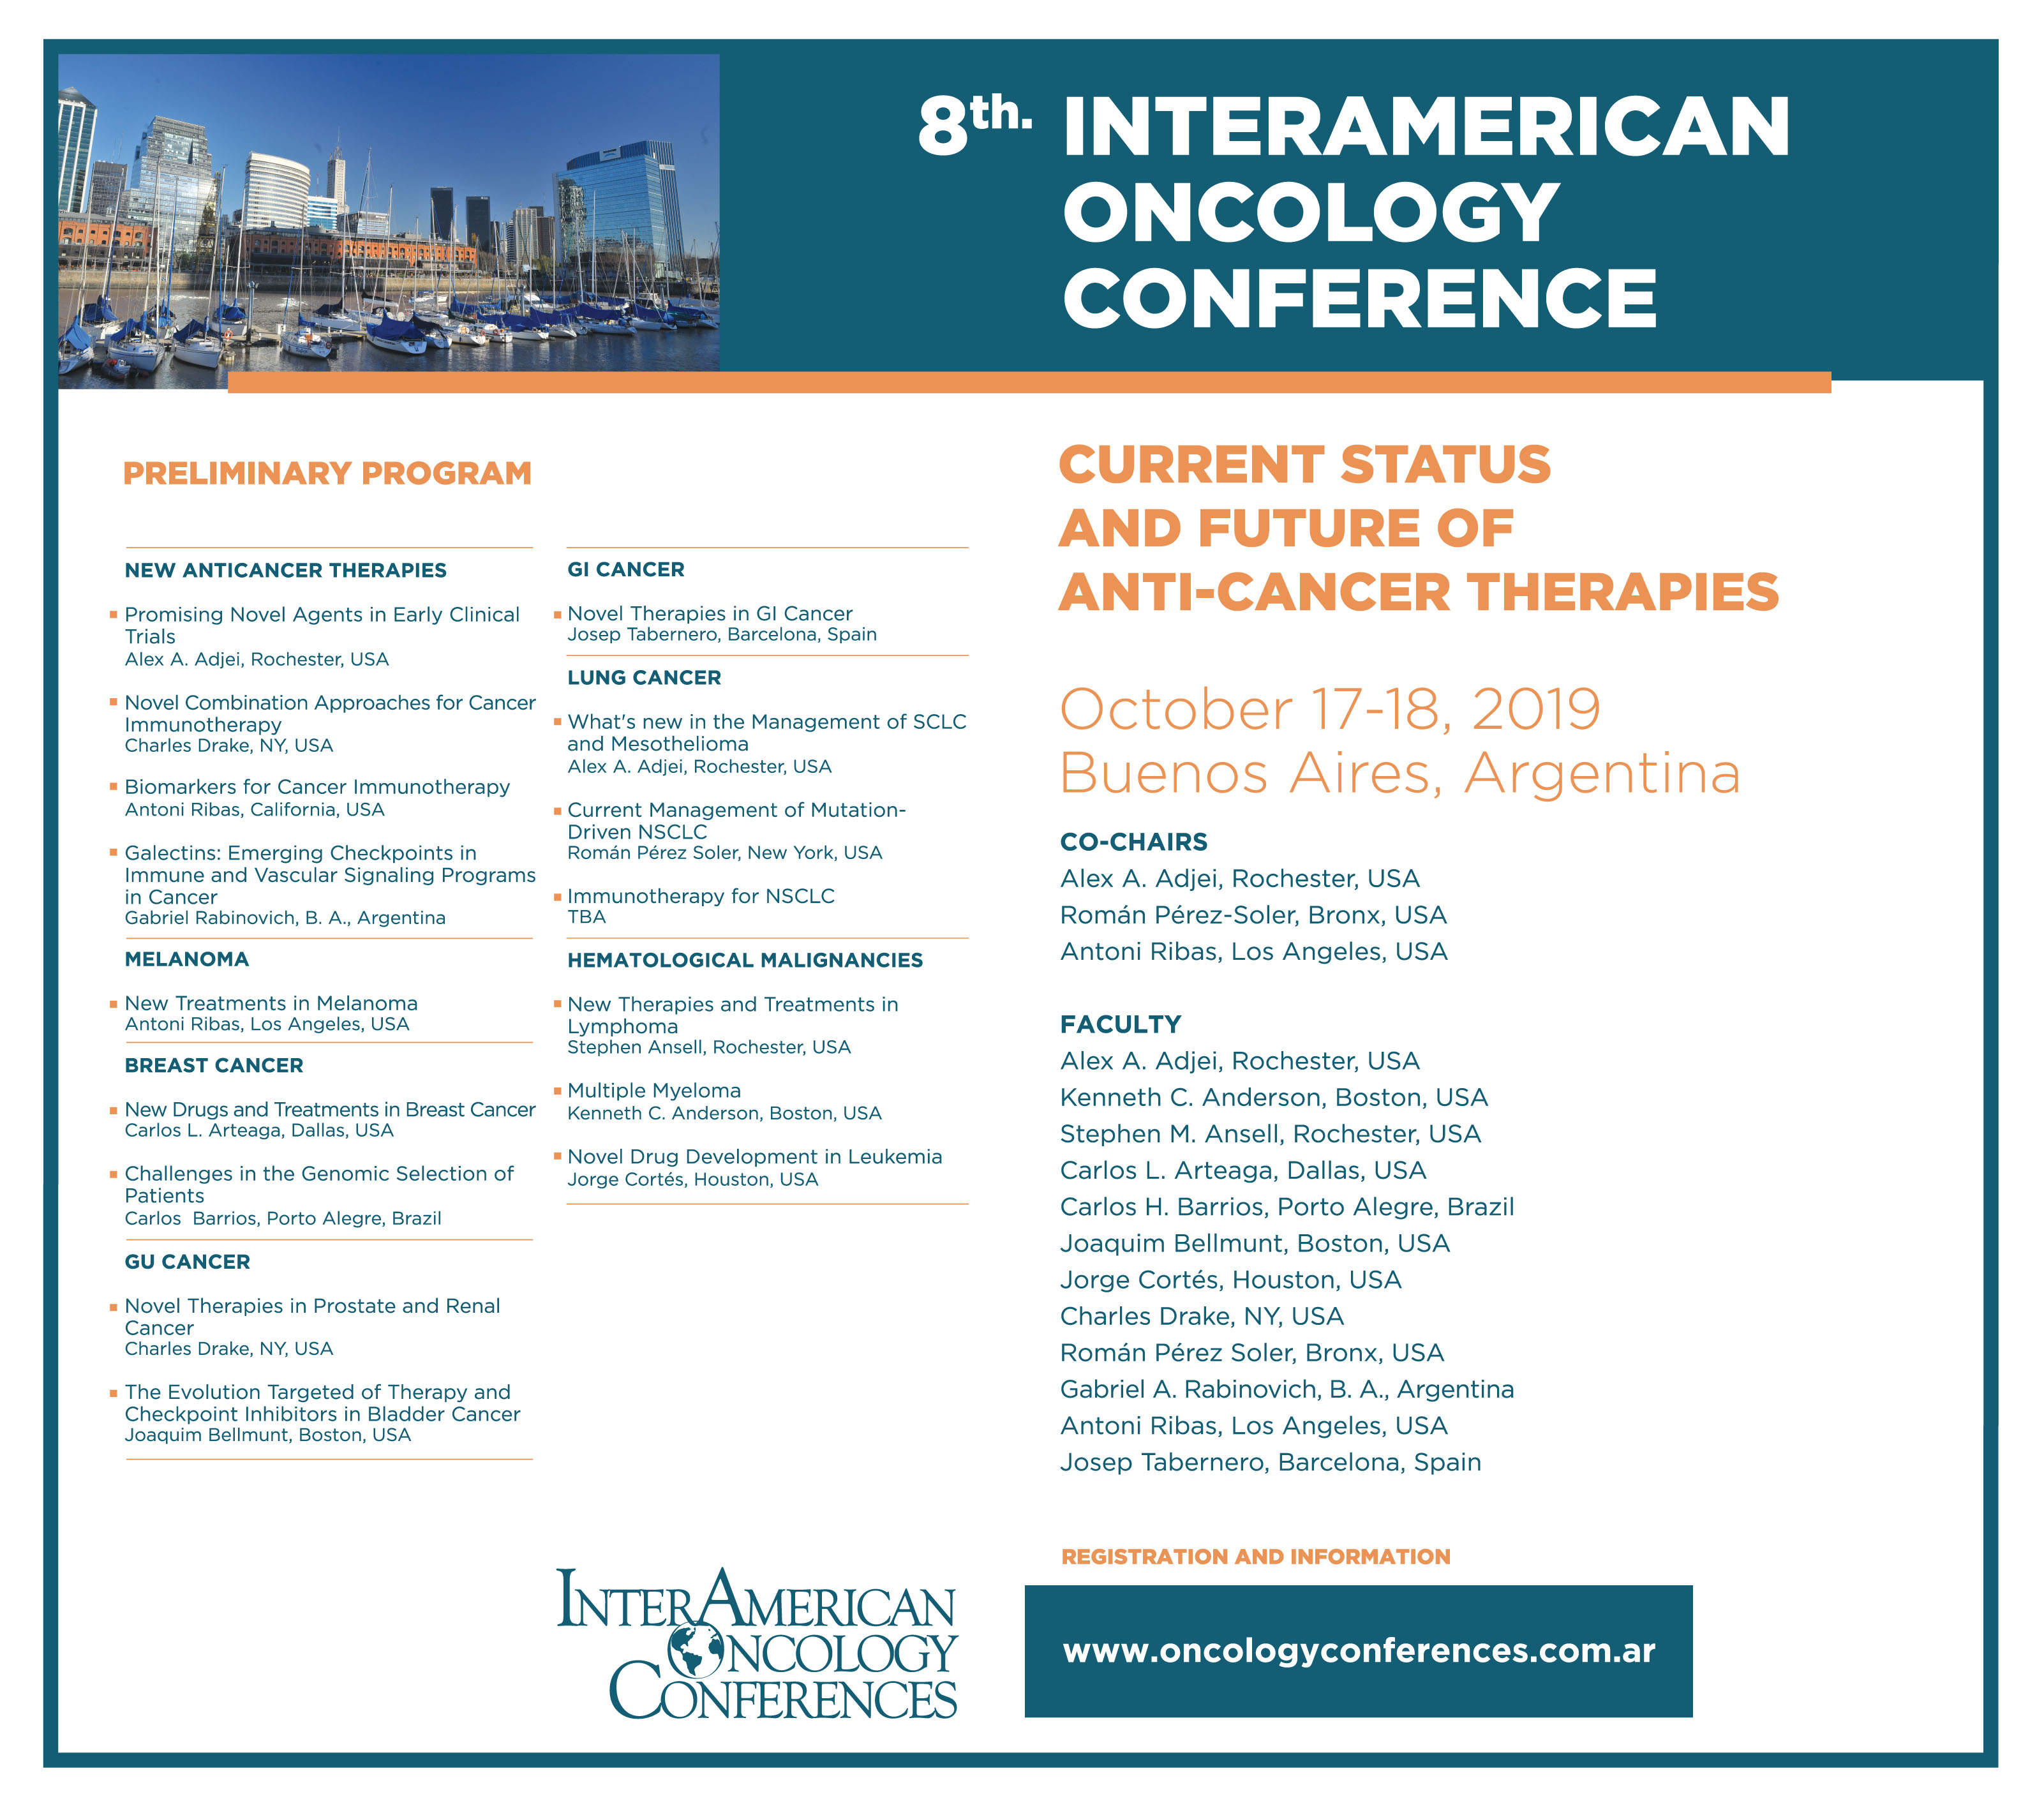 8th InterAmerican Oncology Conference 'Current Status and Future of Anti-Cancer Therapies', CABA, Buenos Aires, Argentina